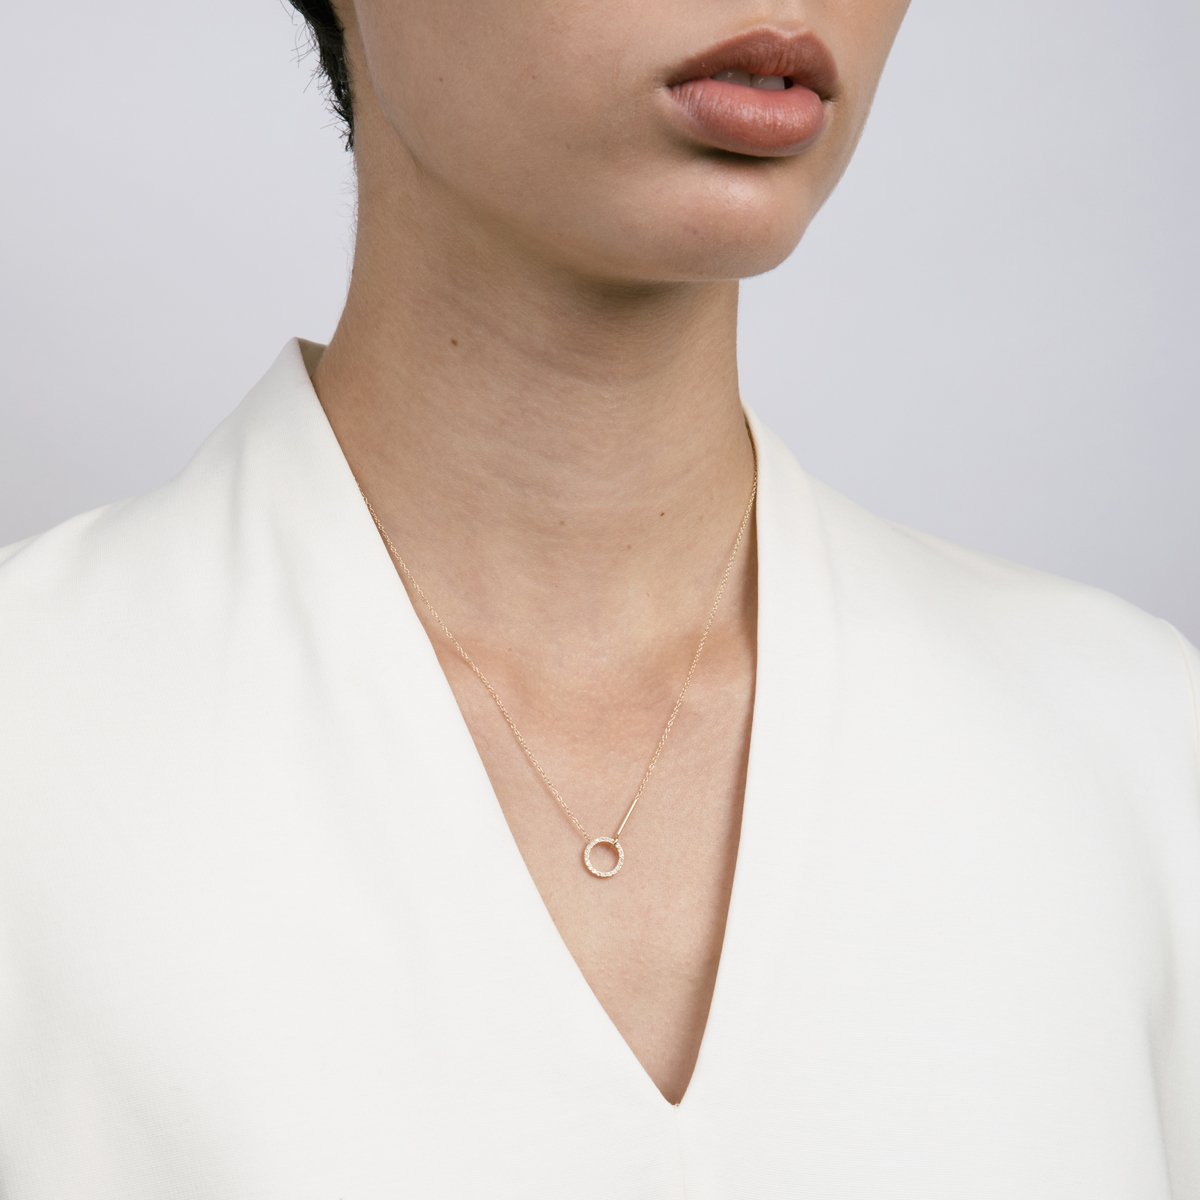 Visata Non-Traditional Necklace in 14k Gold set with White Diamonds By SHW Fine Jewelry NYC